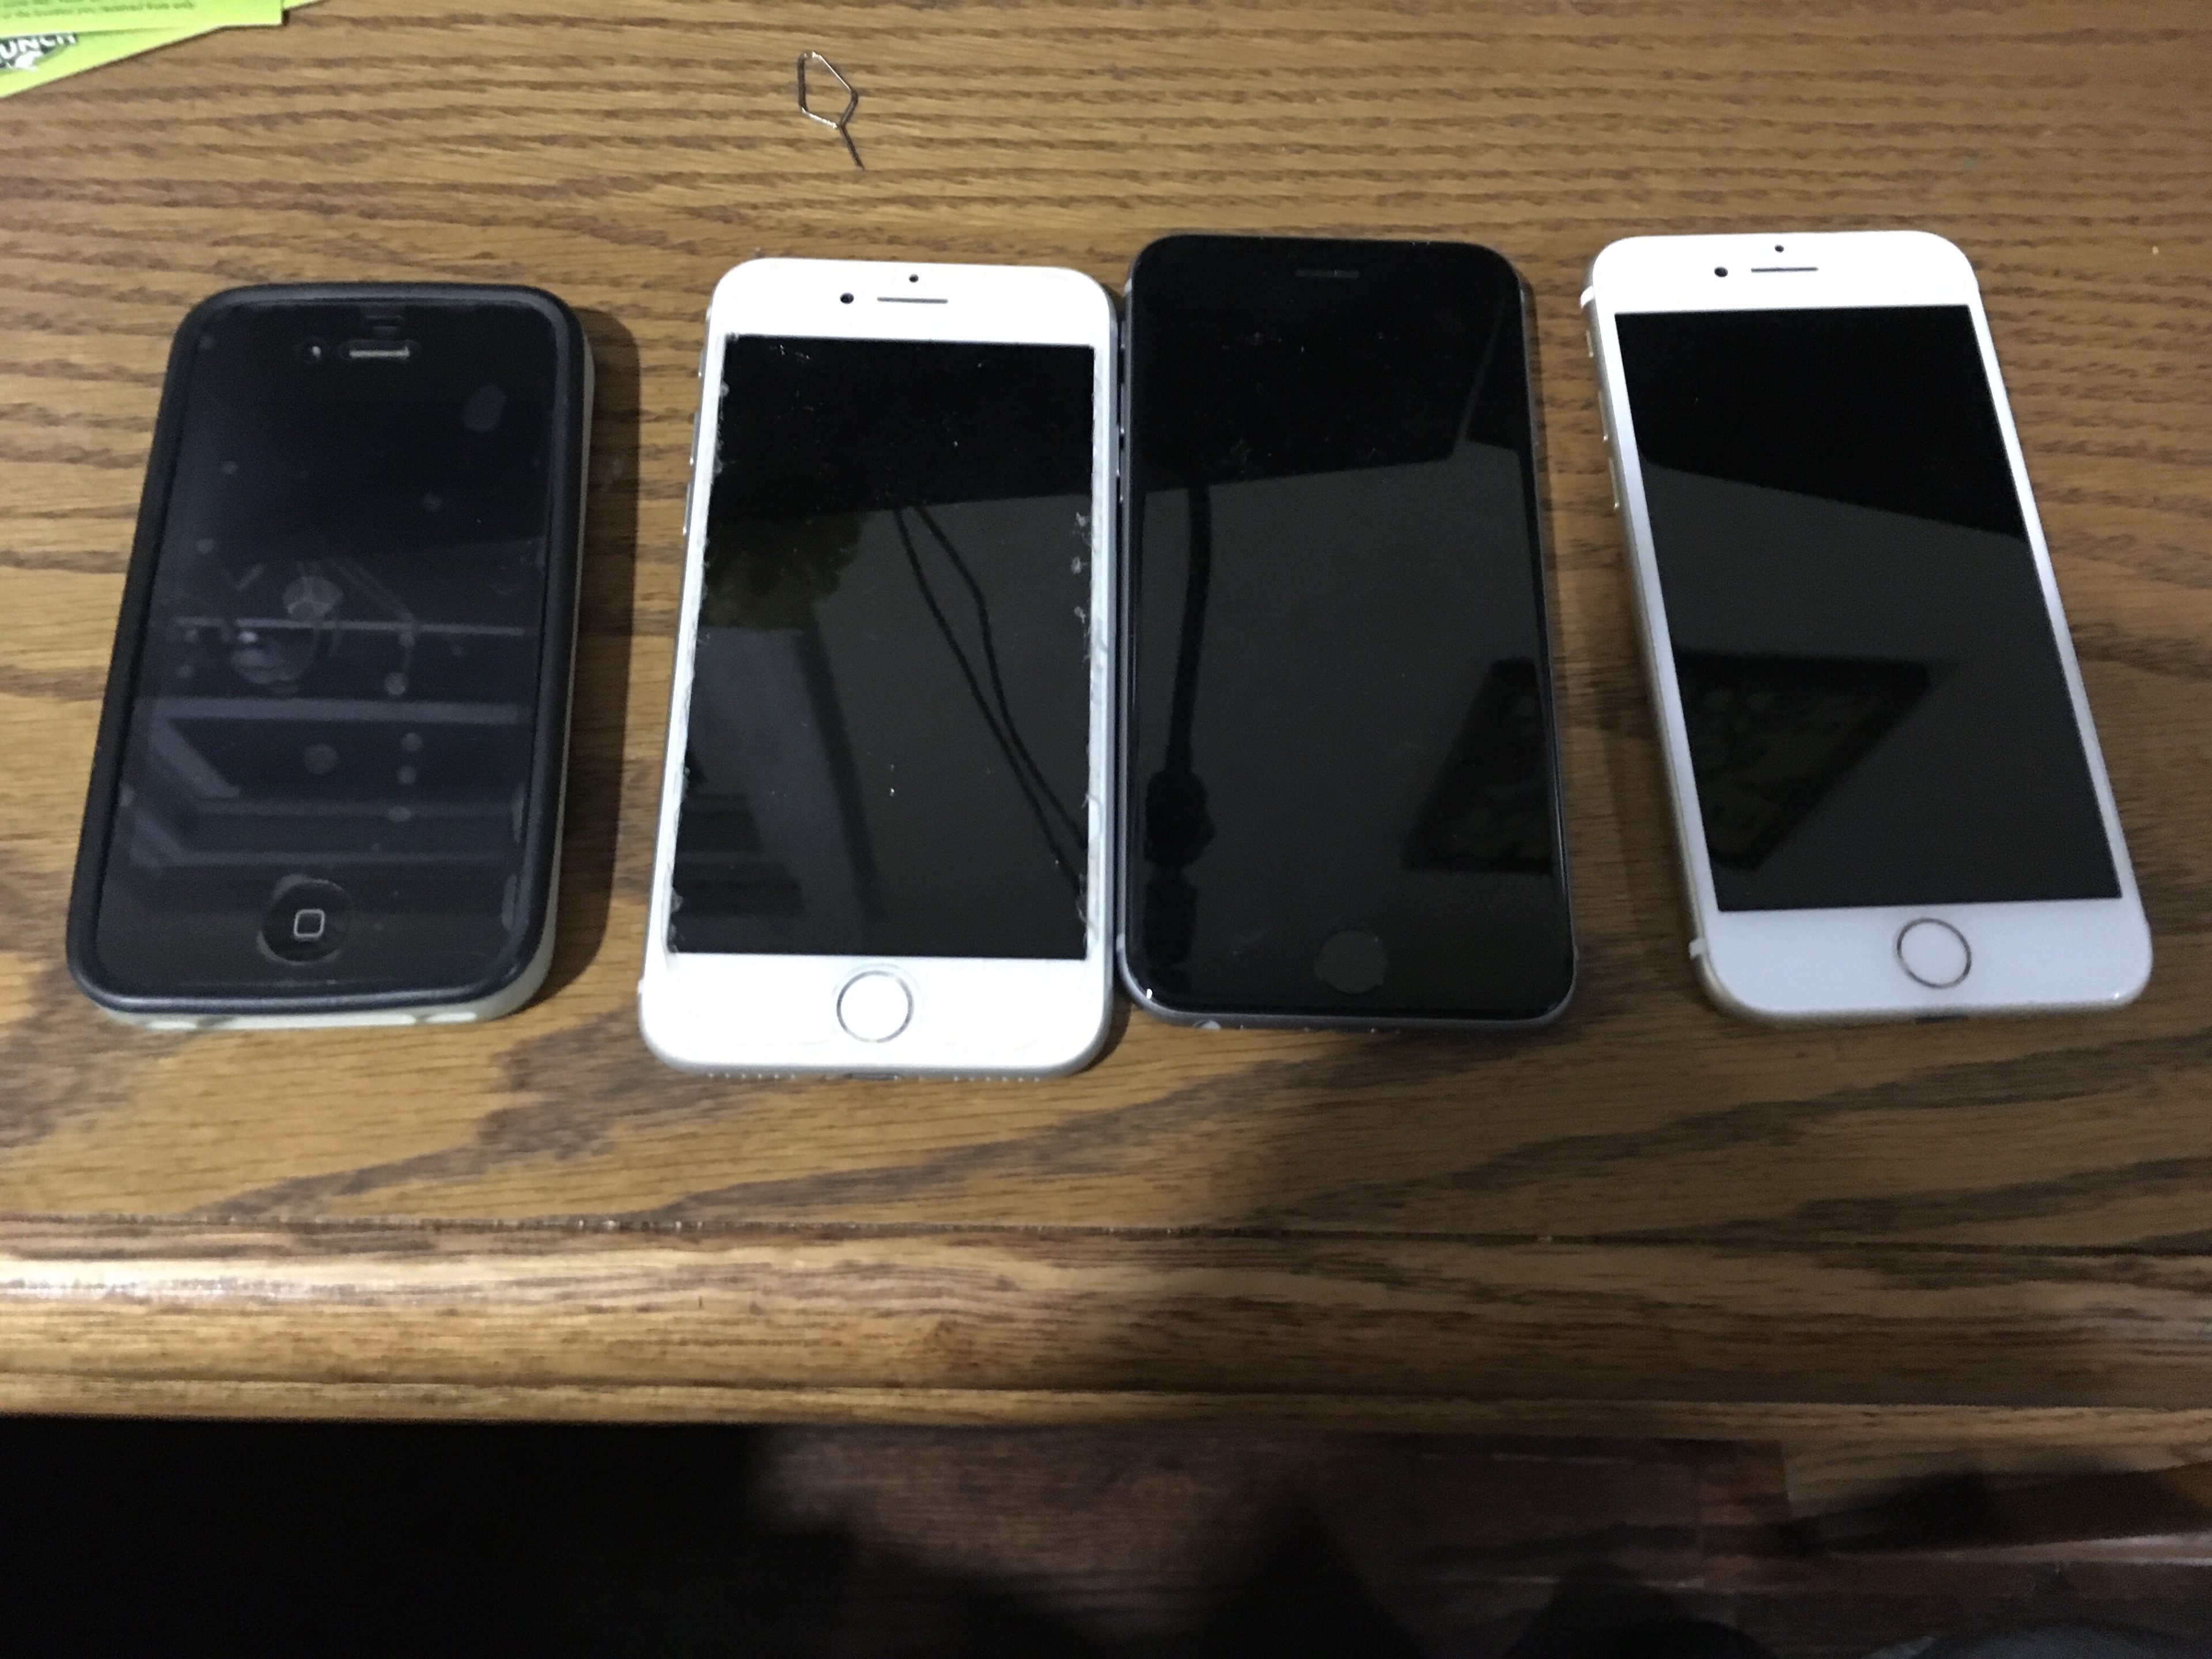 Four iPhones on a desk